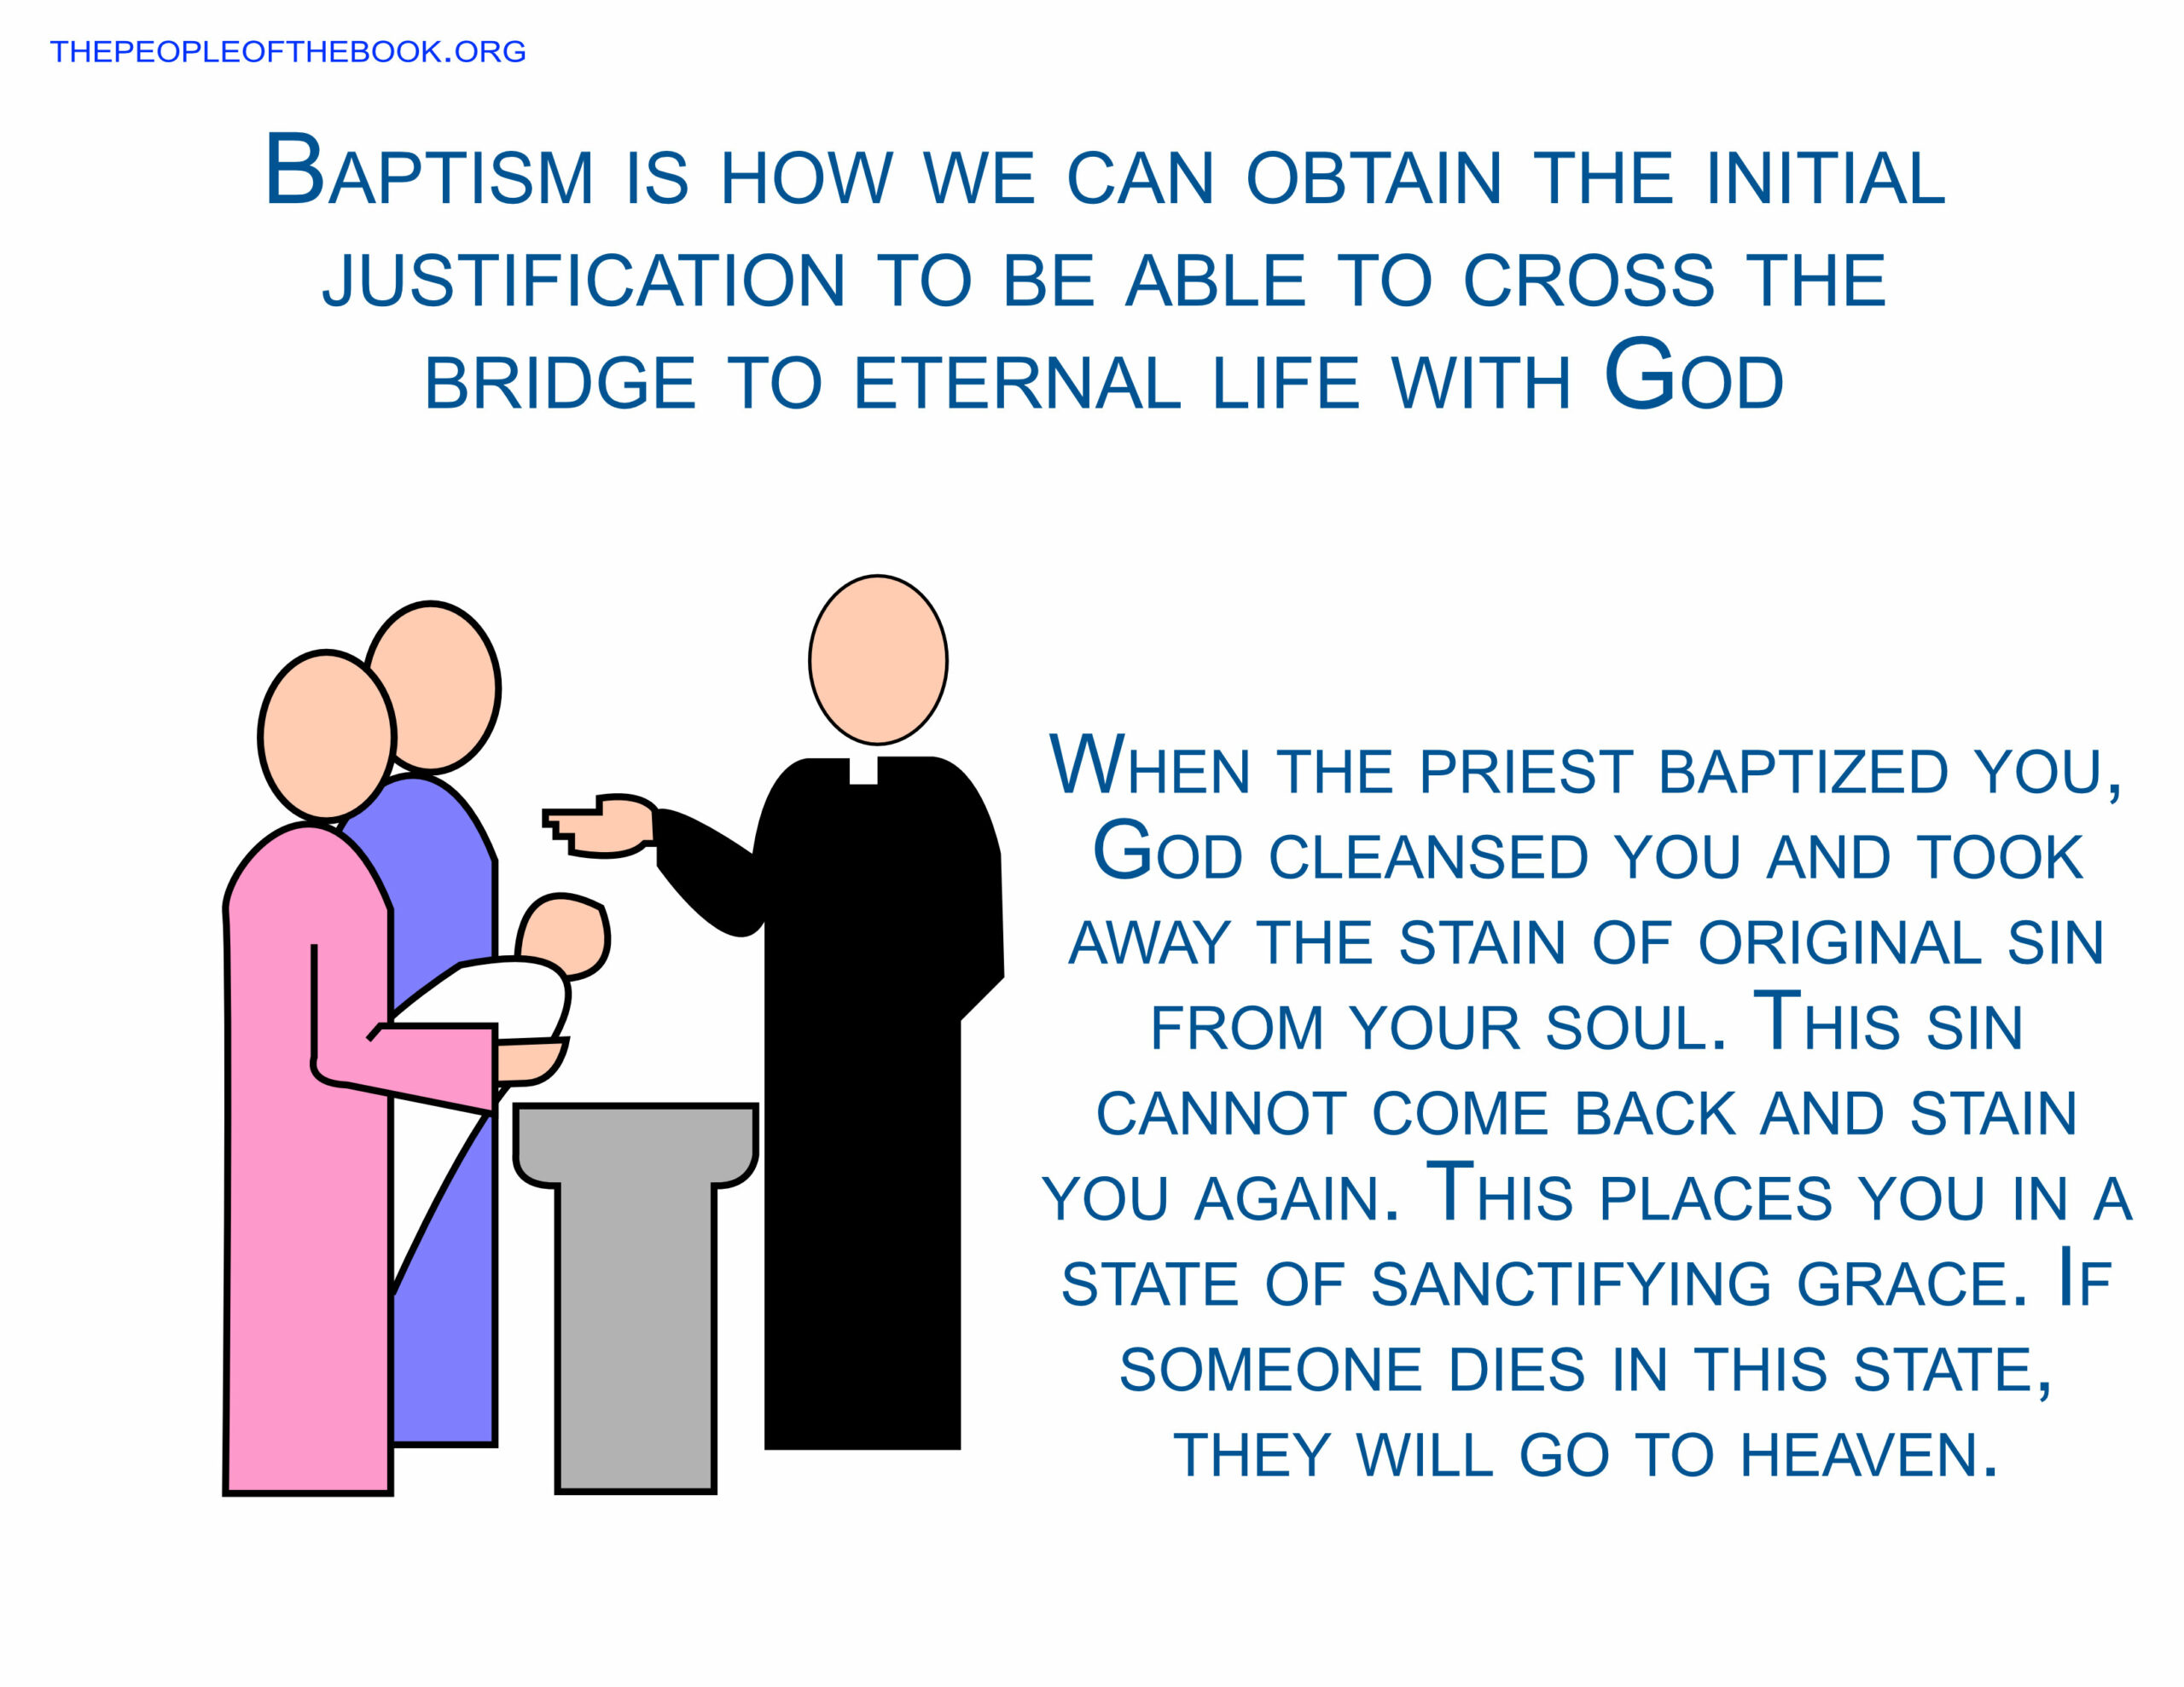 Baptism is how we can obtain the initial justification to be able to cross the bridge